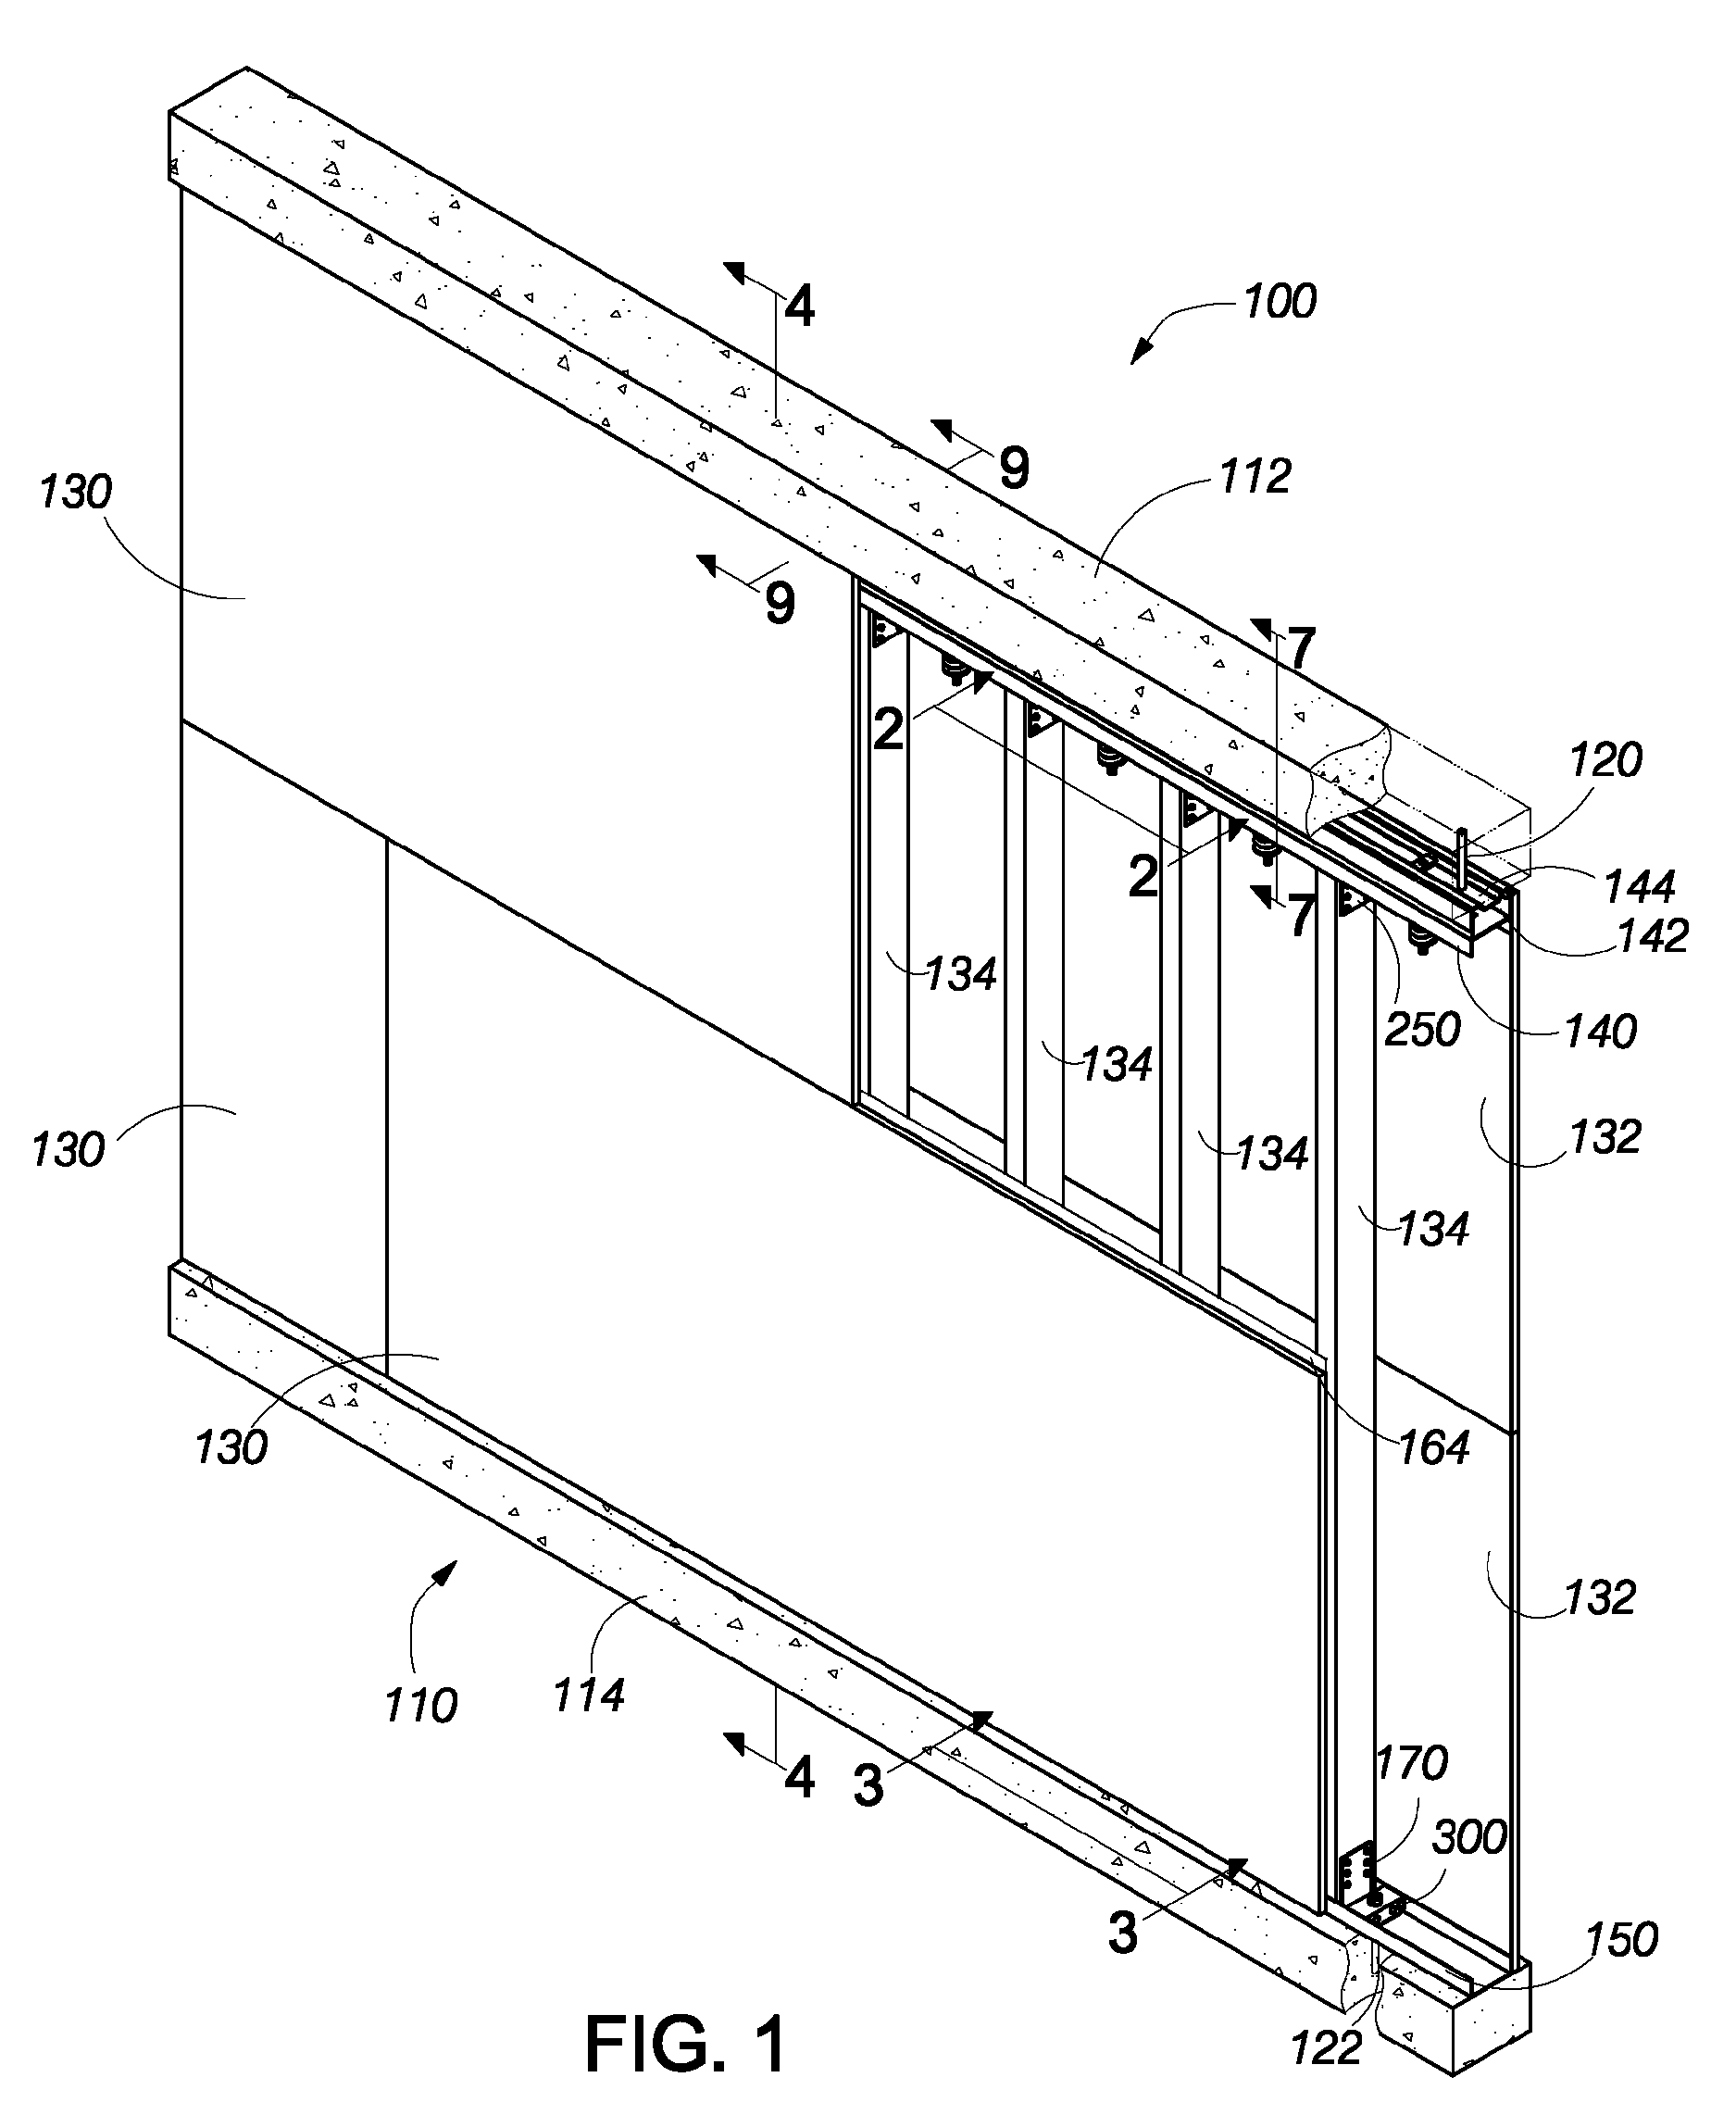 Energy absorbing blast wall for building structure